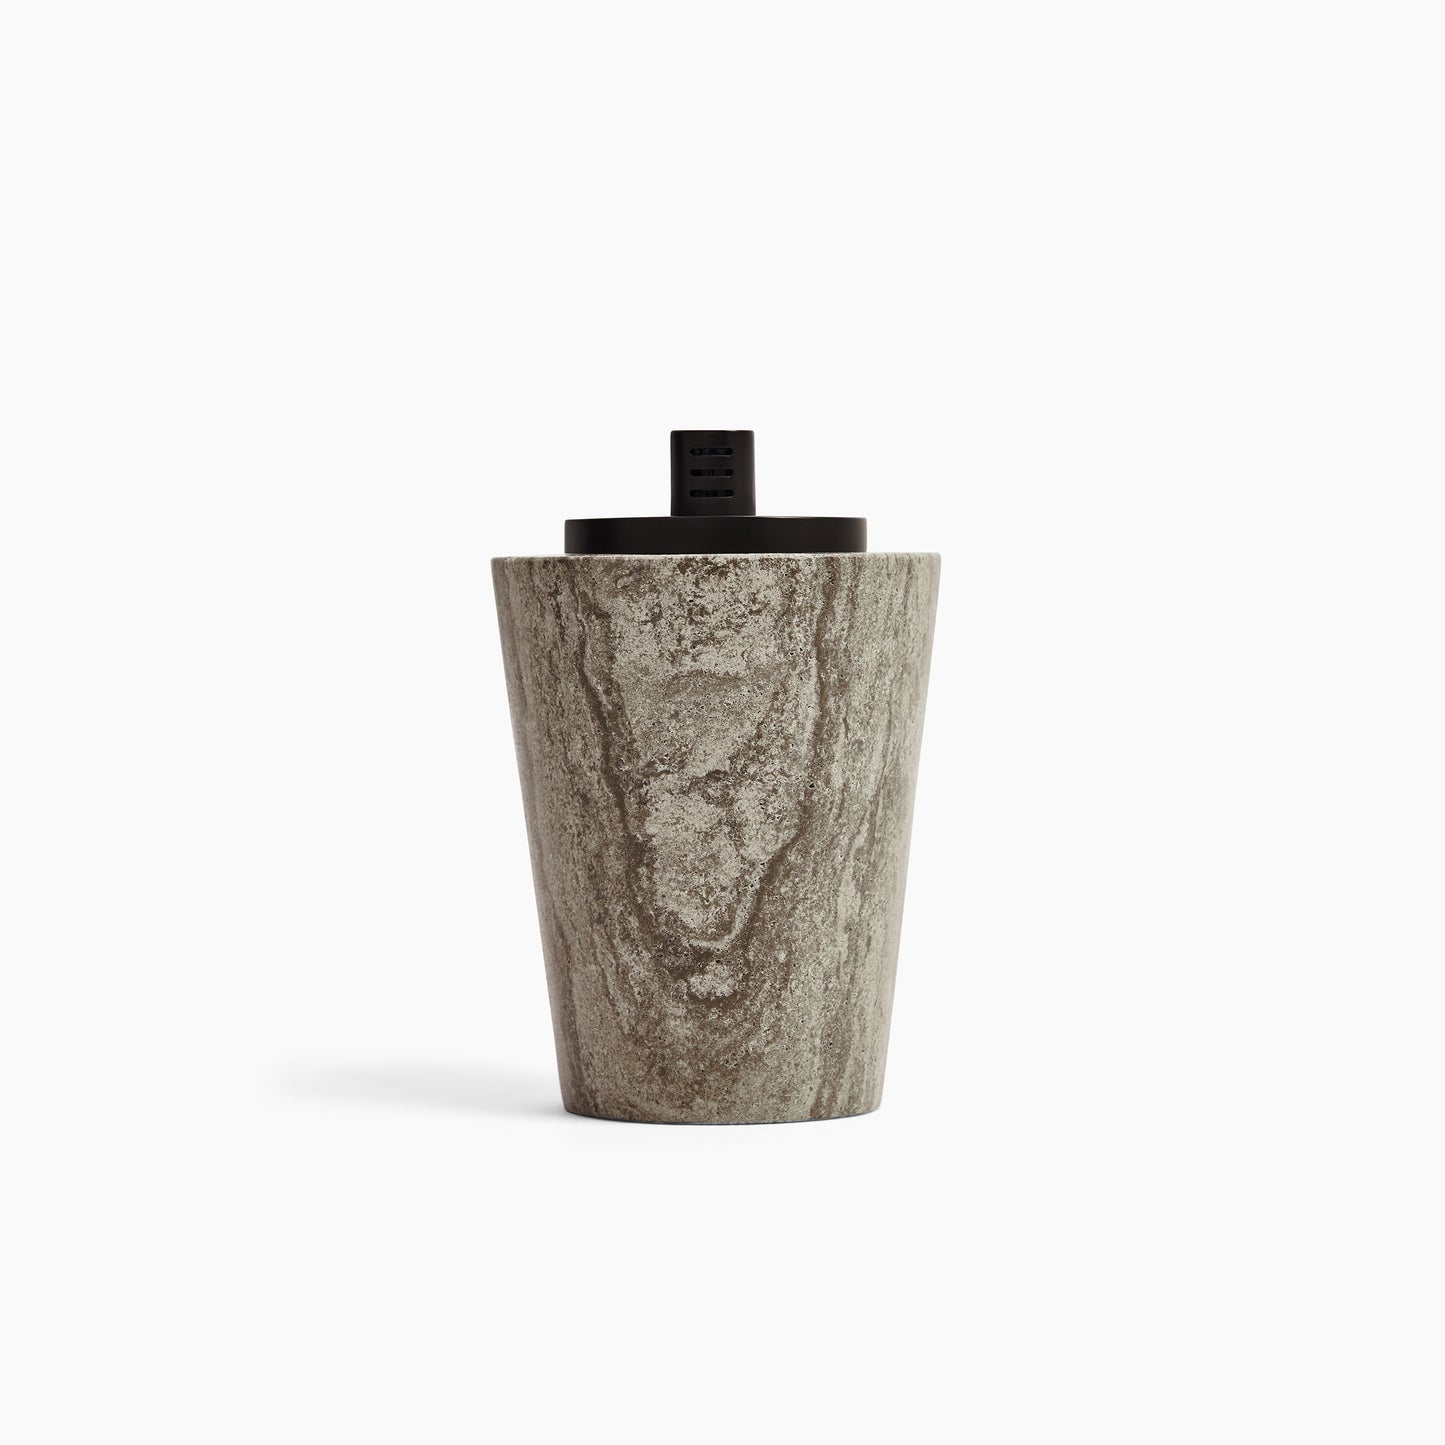 TABLE LIGHTER IN GREY ATHENS MARBLE WITH MATTE BLACK